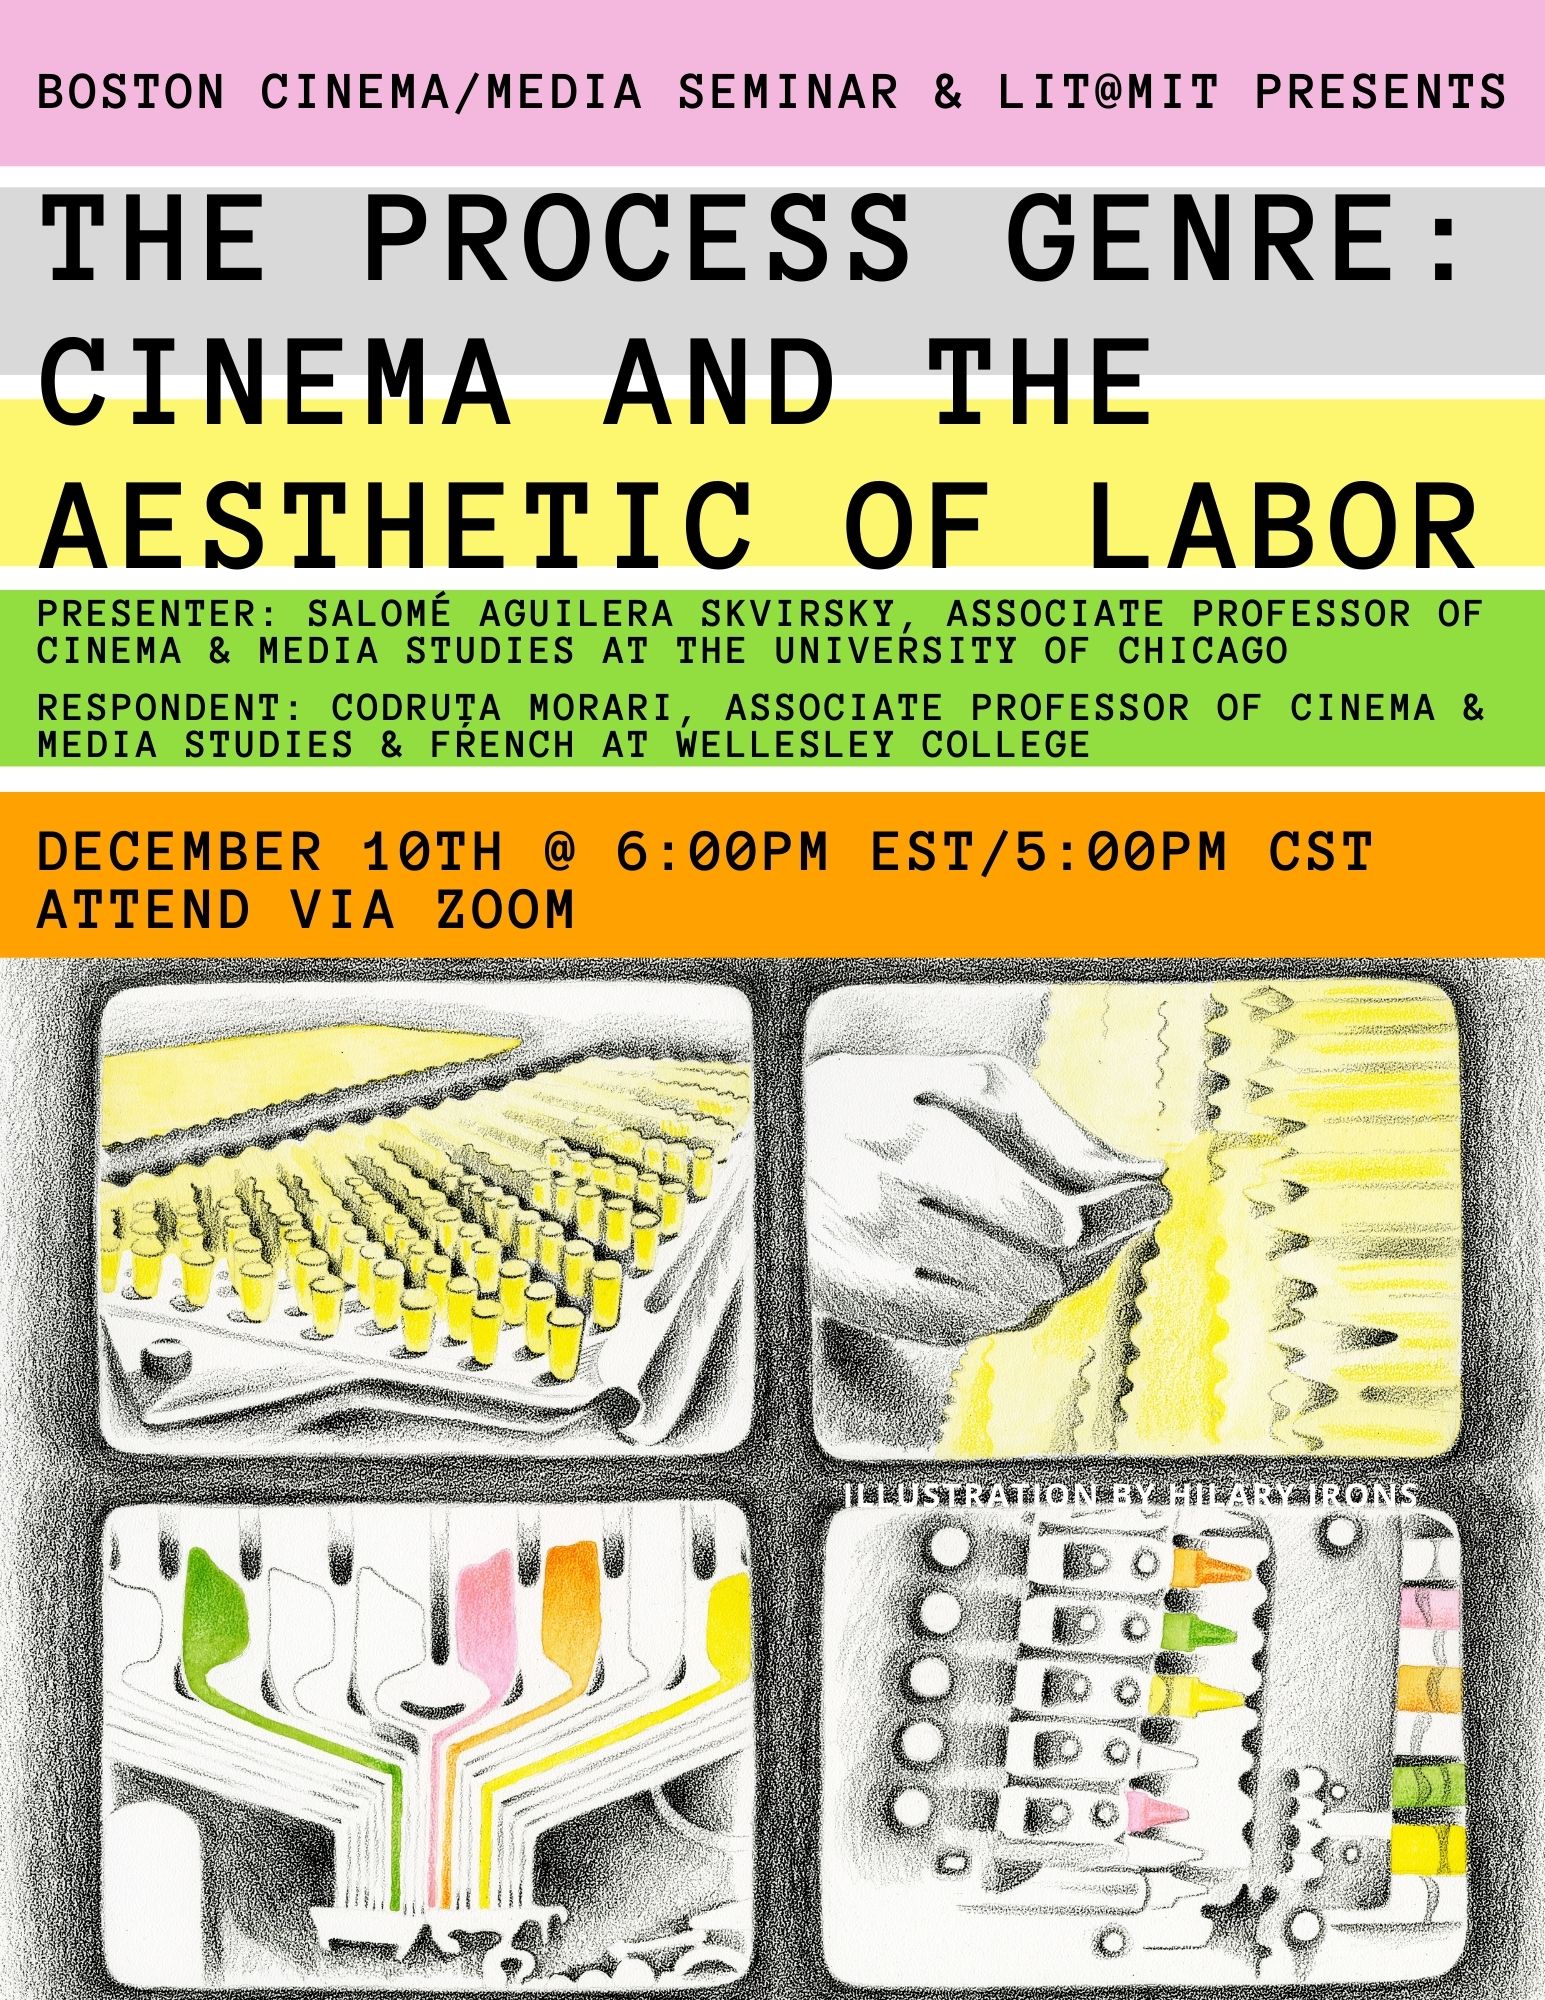 BCMS & Lit@MIT presents, The Process Genre: Cinema and the Aesthetic of Labor